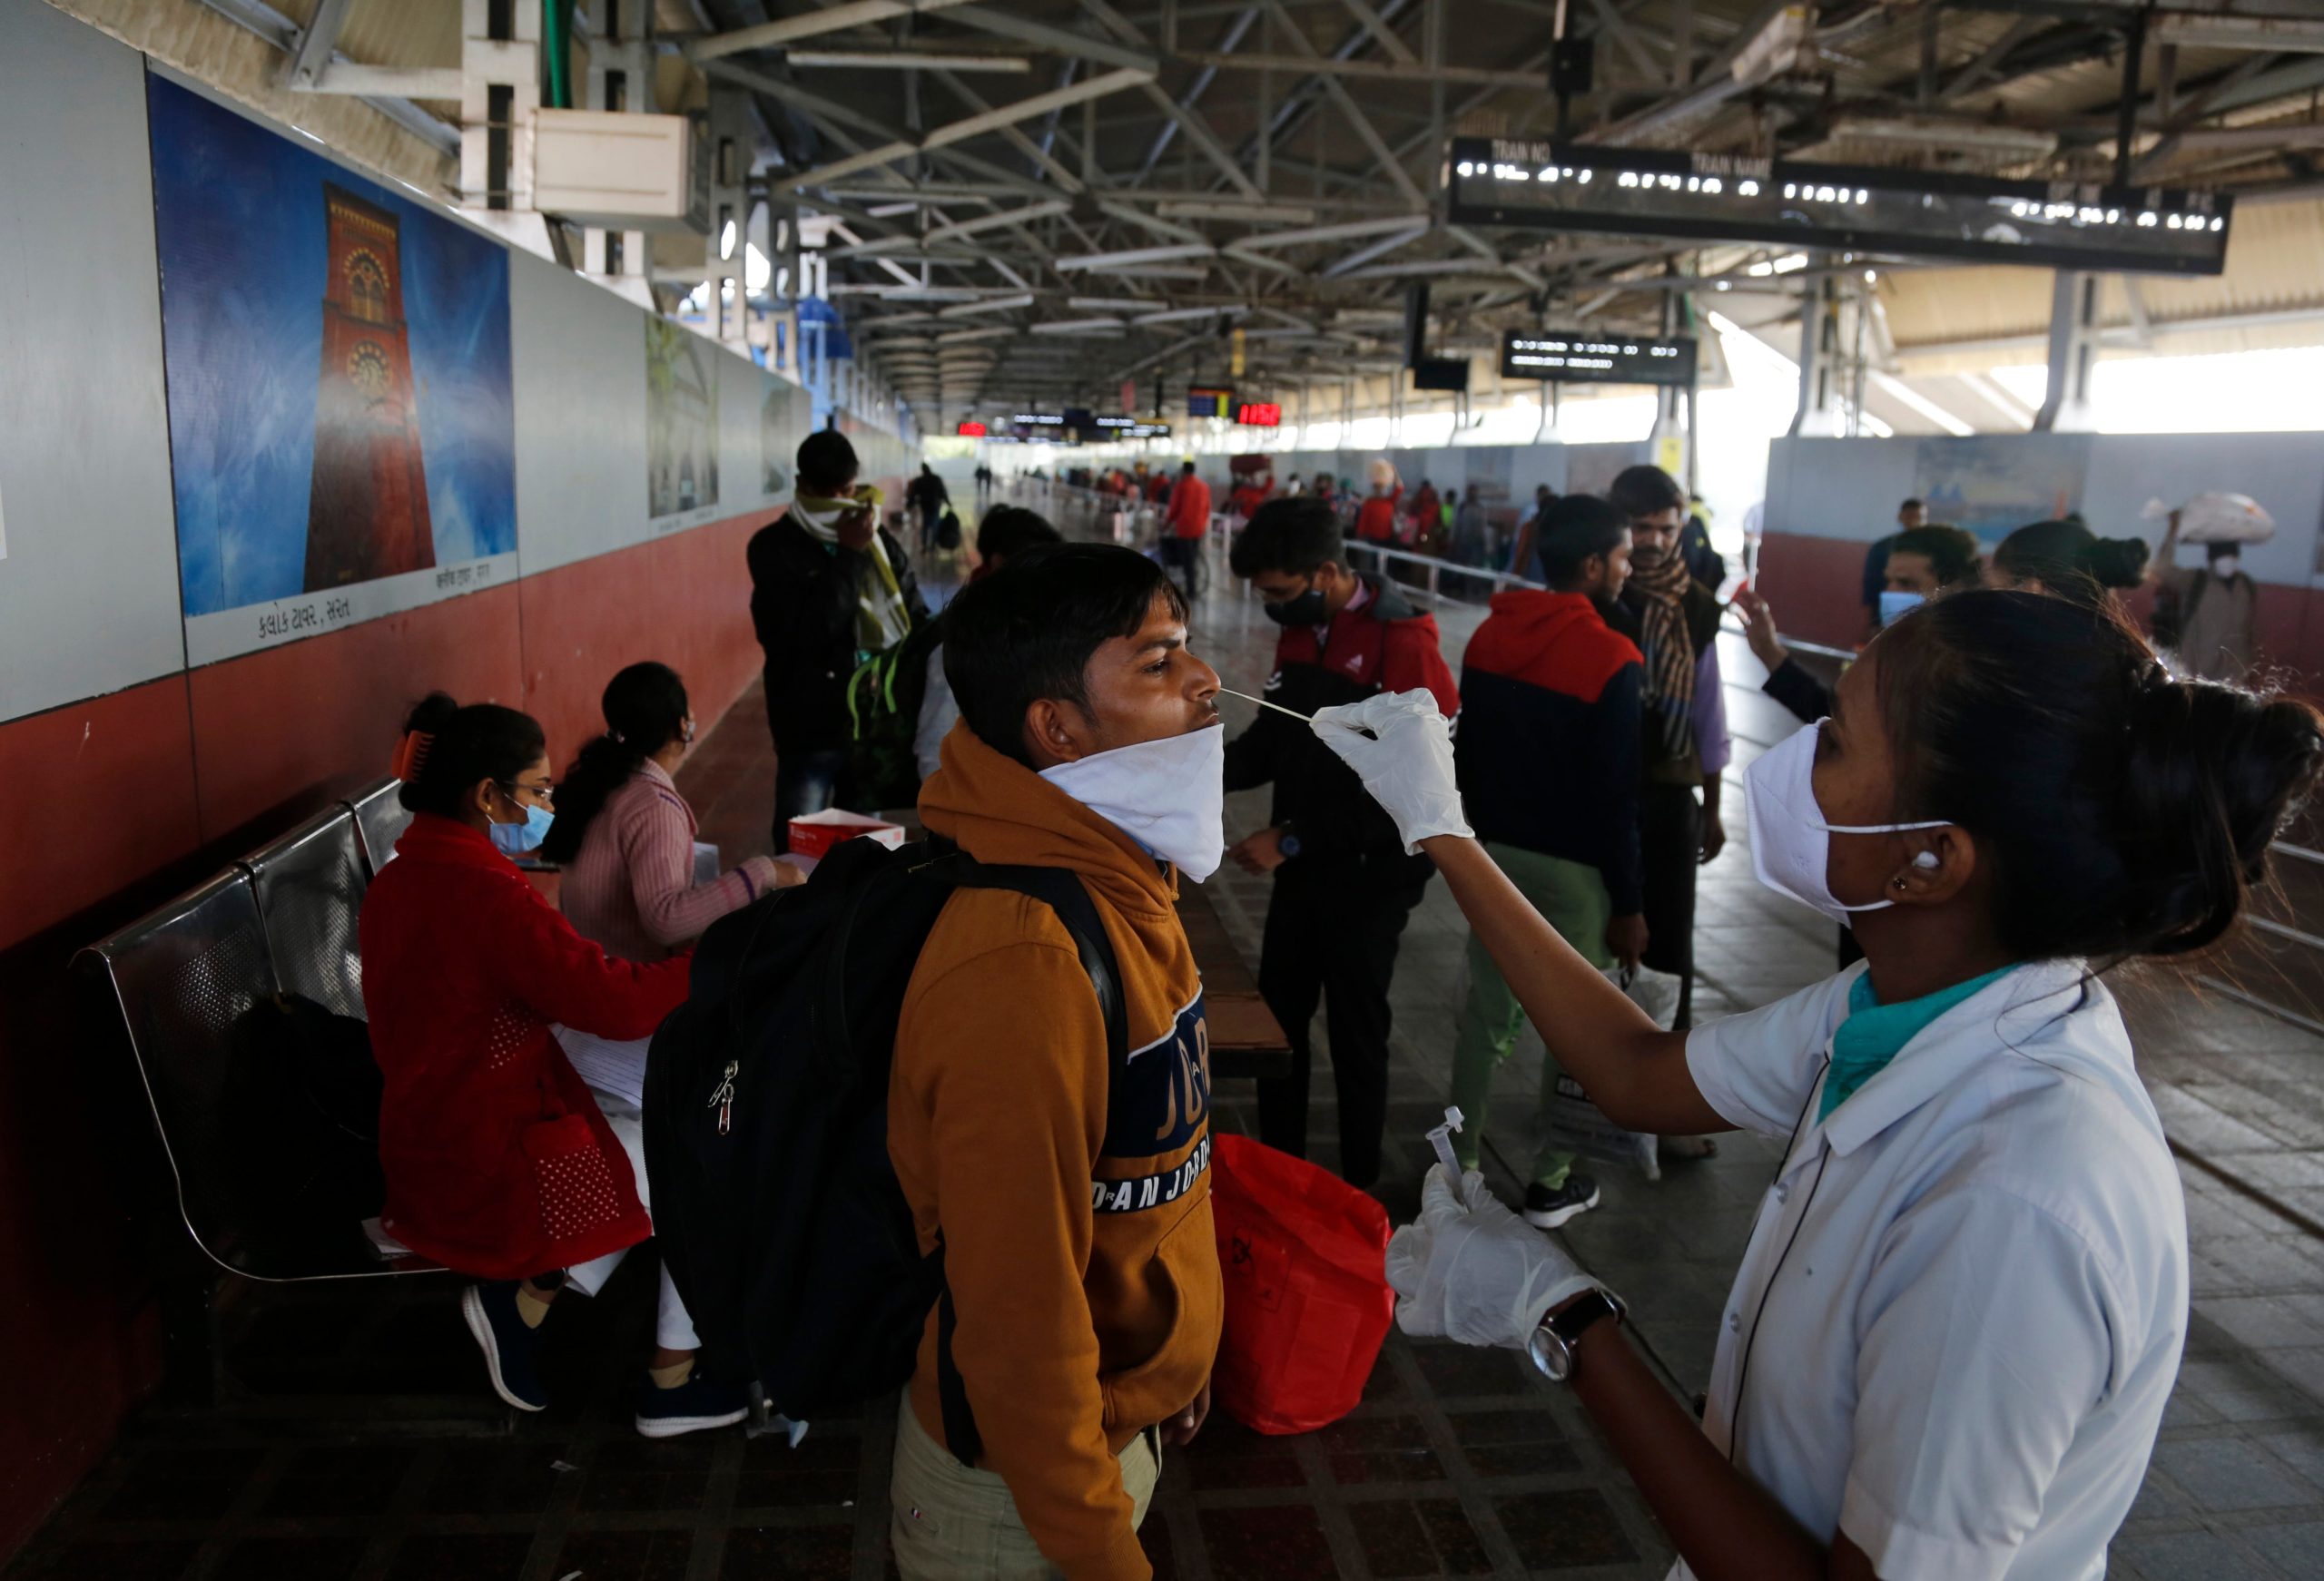 A health worker takes a swab sample of a passenger entering the city to test for COVID-19 at a railway station in Ahmedabad, India, Friday, Dec. 3, 2021. India on Thursday confirmed its first cases of the omicron coronavirus variant in two people and officials said one arrived from South Africa and the other had no travel history. A top medical expert urged people to get vaccinated. (Photo: Ajit Solanki, AP)